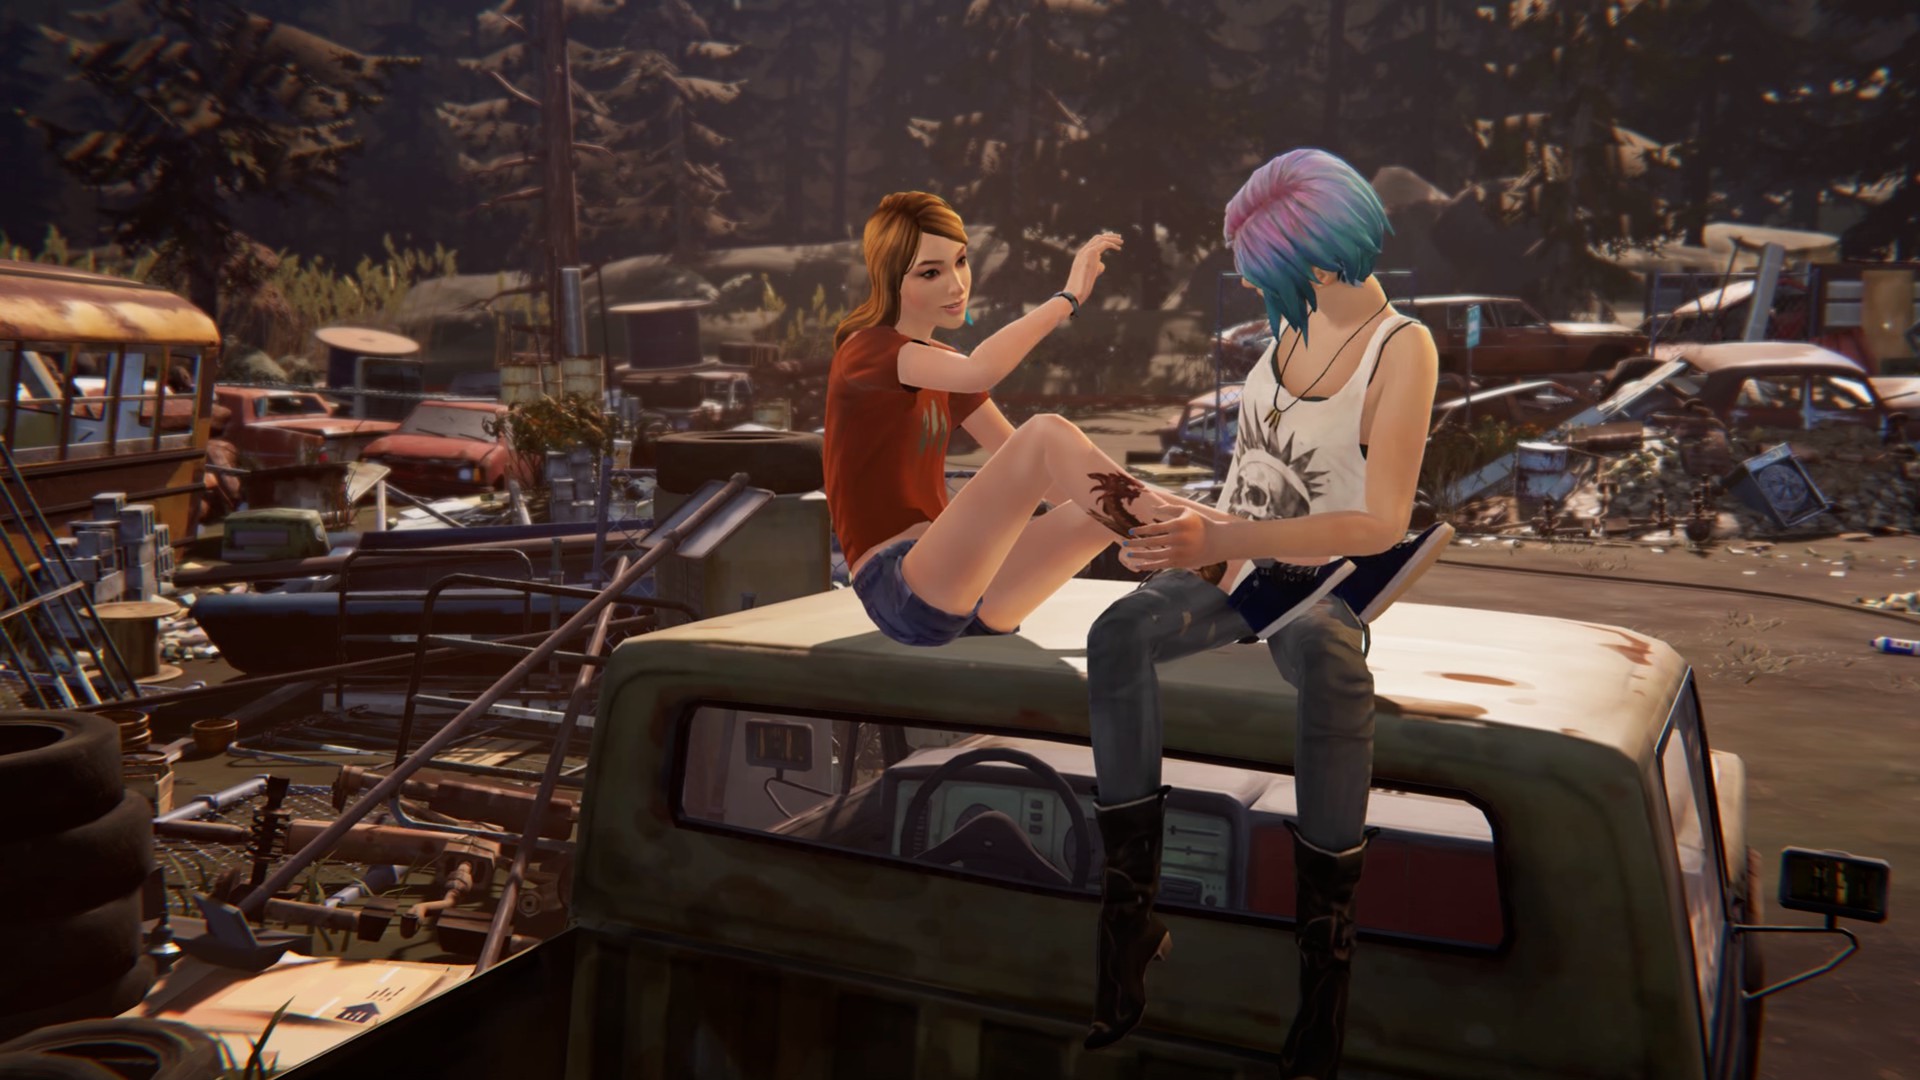 General 1920x1080 Life is Strange Before the Storm Chloe Price Rachel Amber skinny jeans necklace jean shorts tank top black bras inked girls tattoo Arcadia Bay smiling emo skull sneakers legs up bent legs T-shirt red t-shirt short sleeves redhead dyed hair two women video games video game girls video game characters screen shot PC gaming pickup trucks